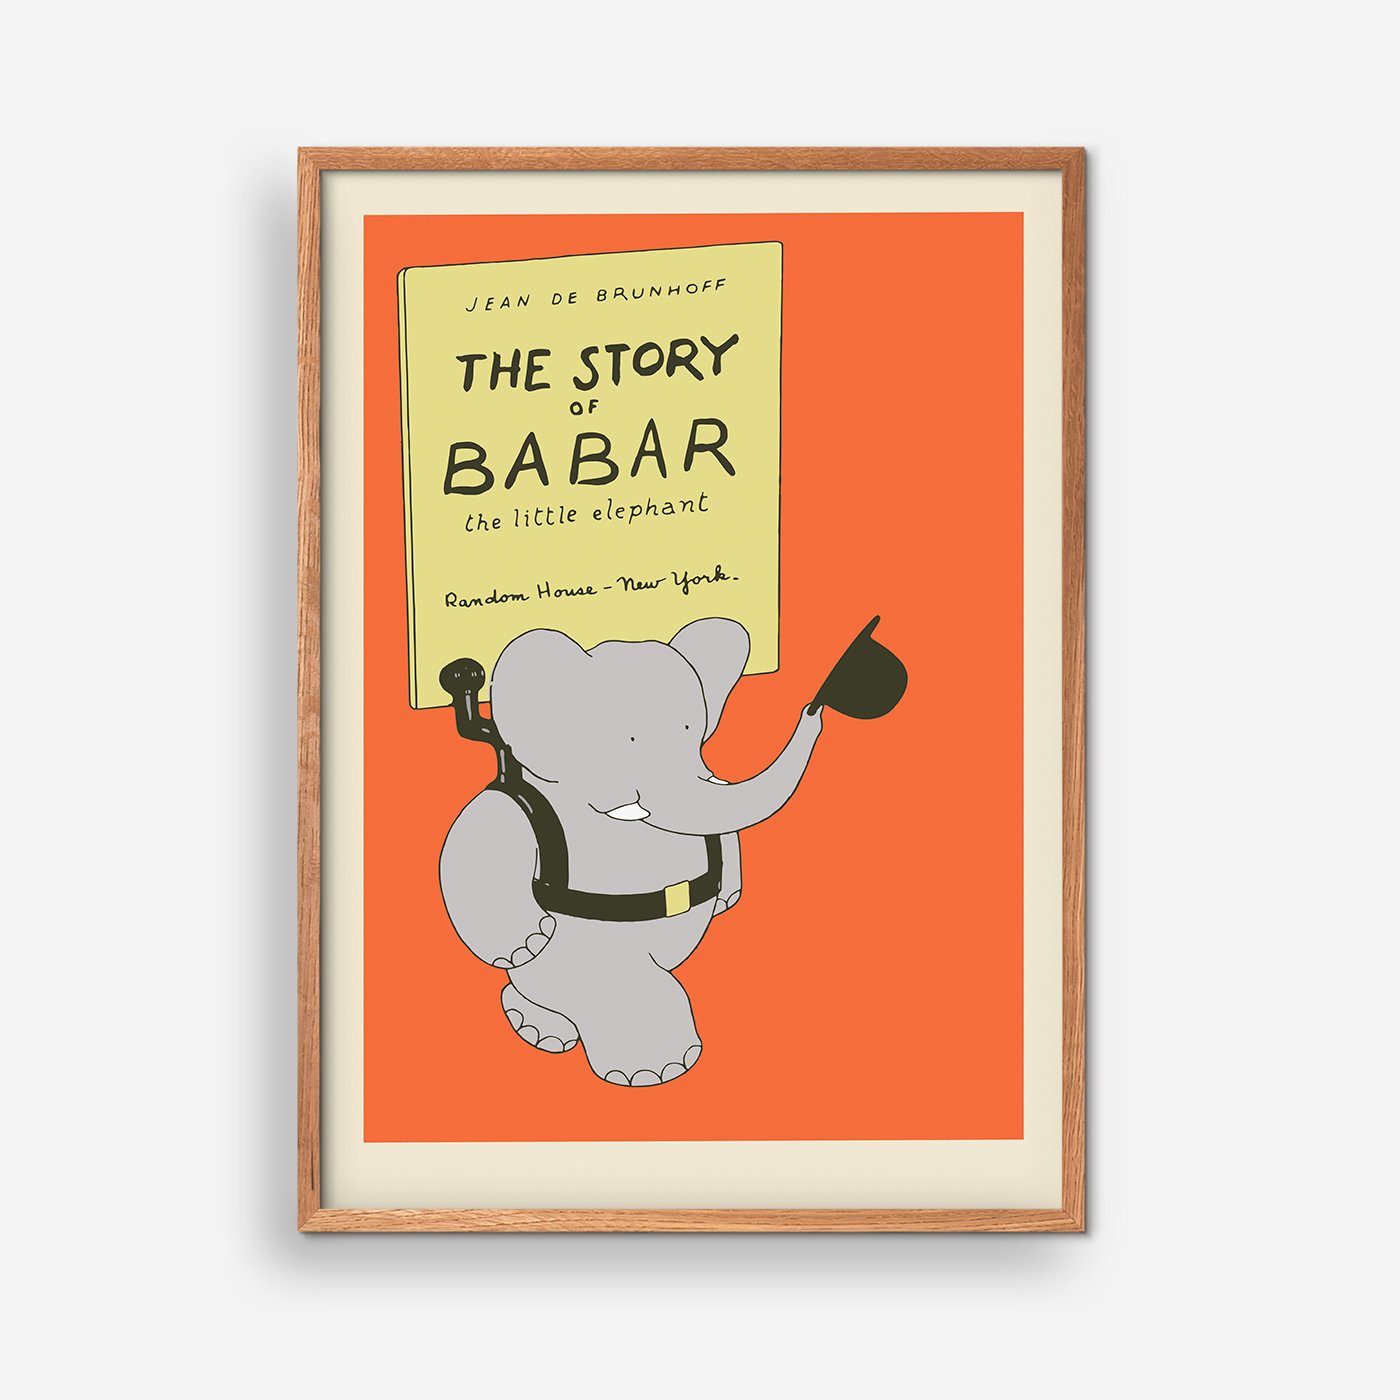 The Story Of Babar - Jean de Brunhoff